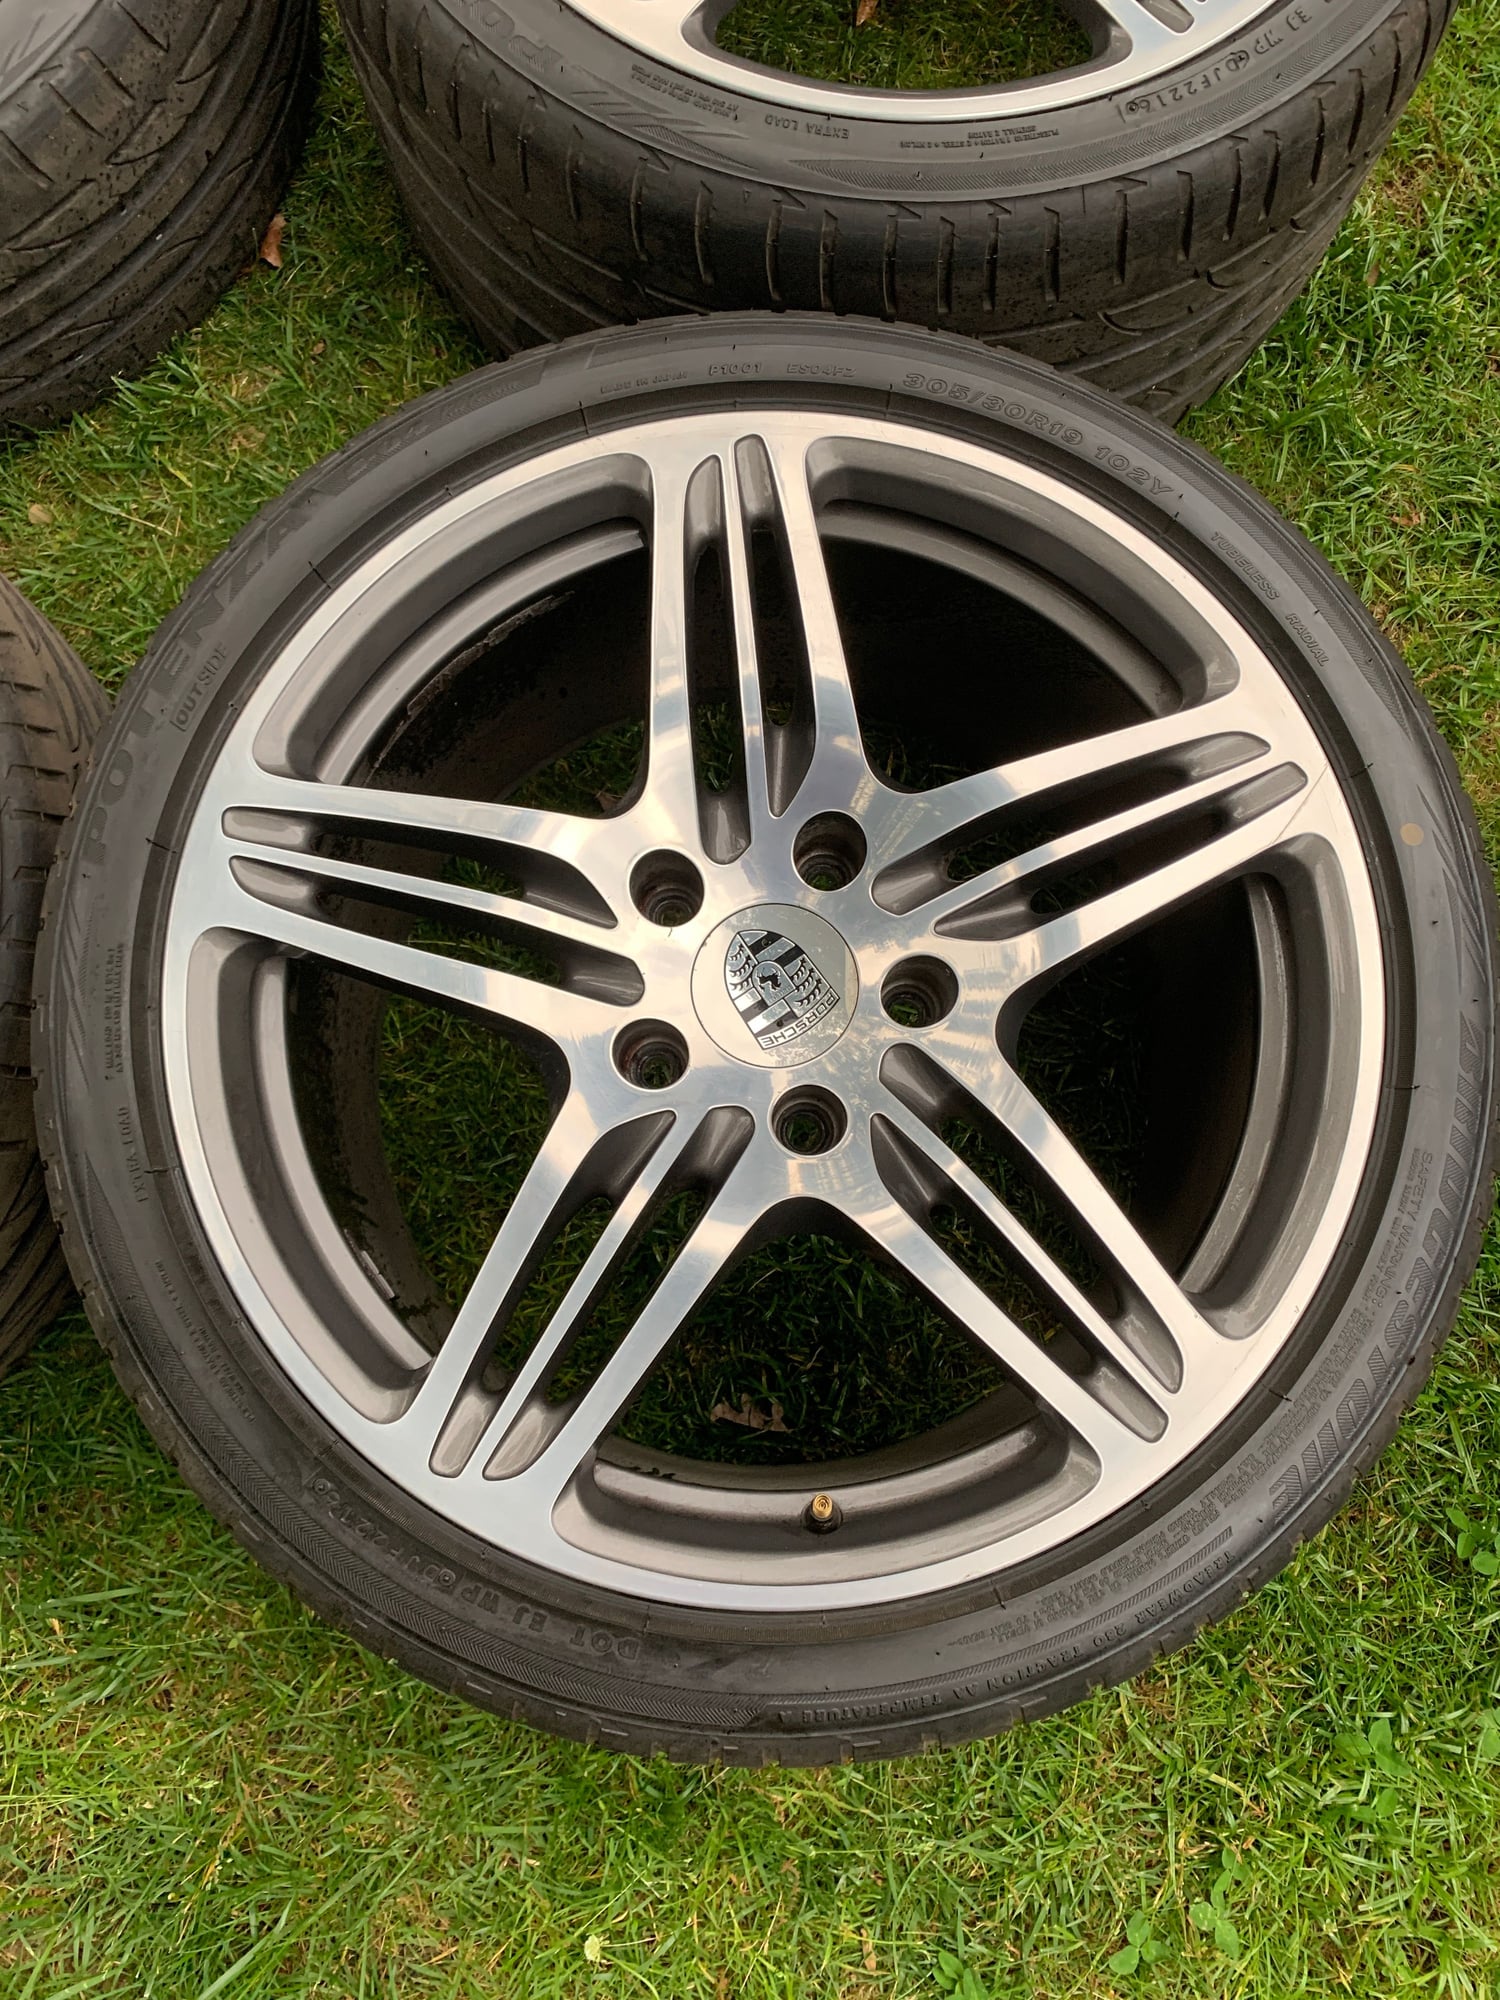 Wheels and Tires/Axles - OEM 997 Turbo rims and Potenza S-04 tires - Used - 2001 to 2011 Porsche 911 - Sewell, NJ 08080, United States